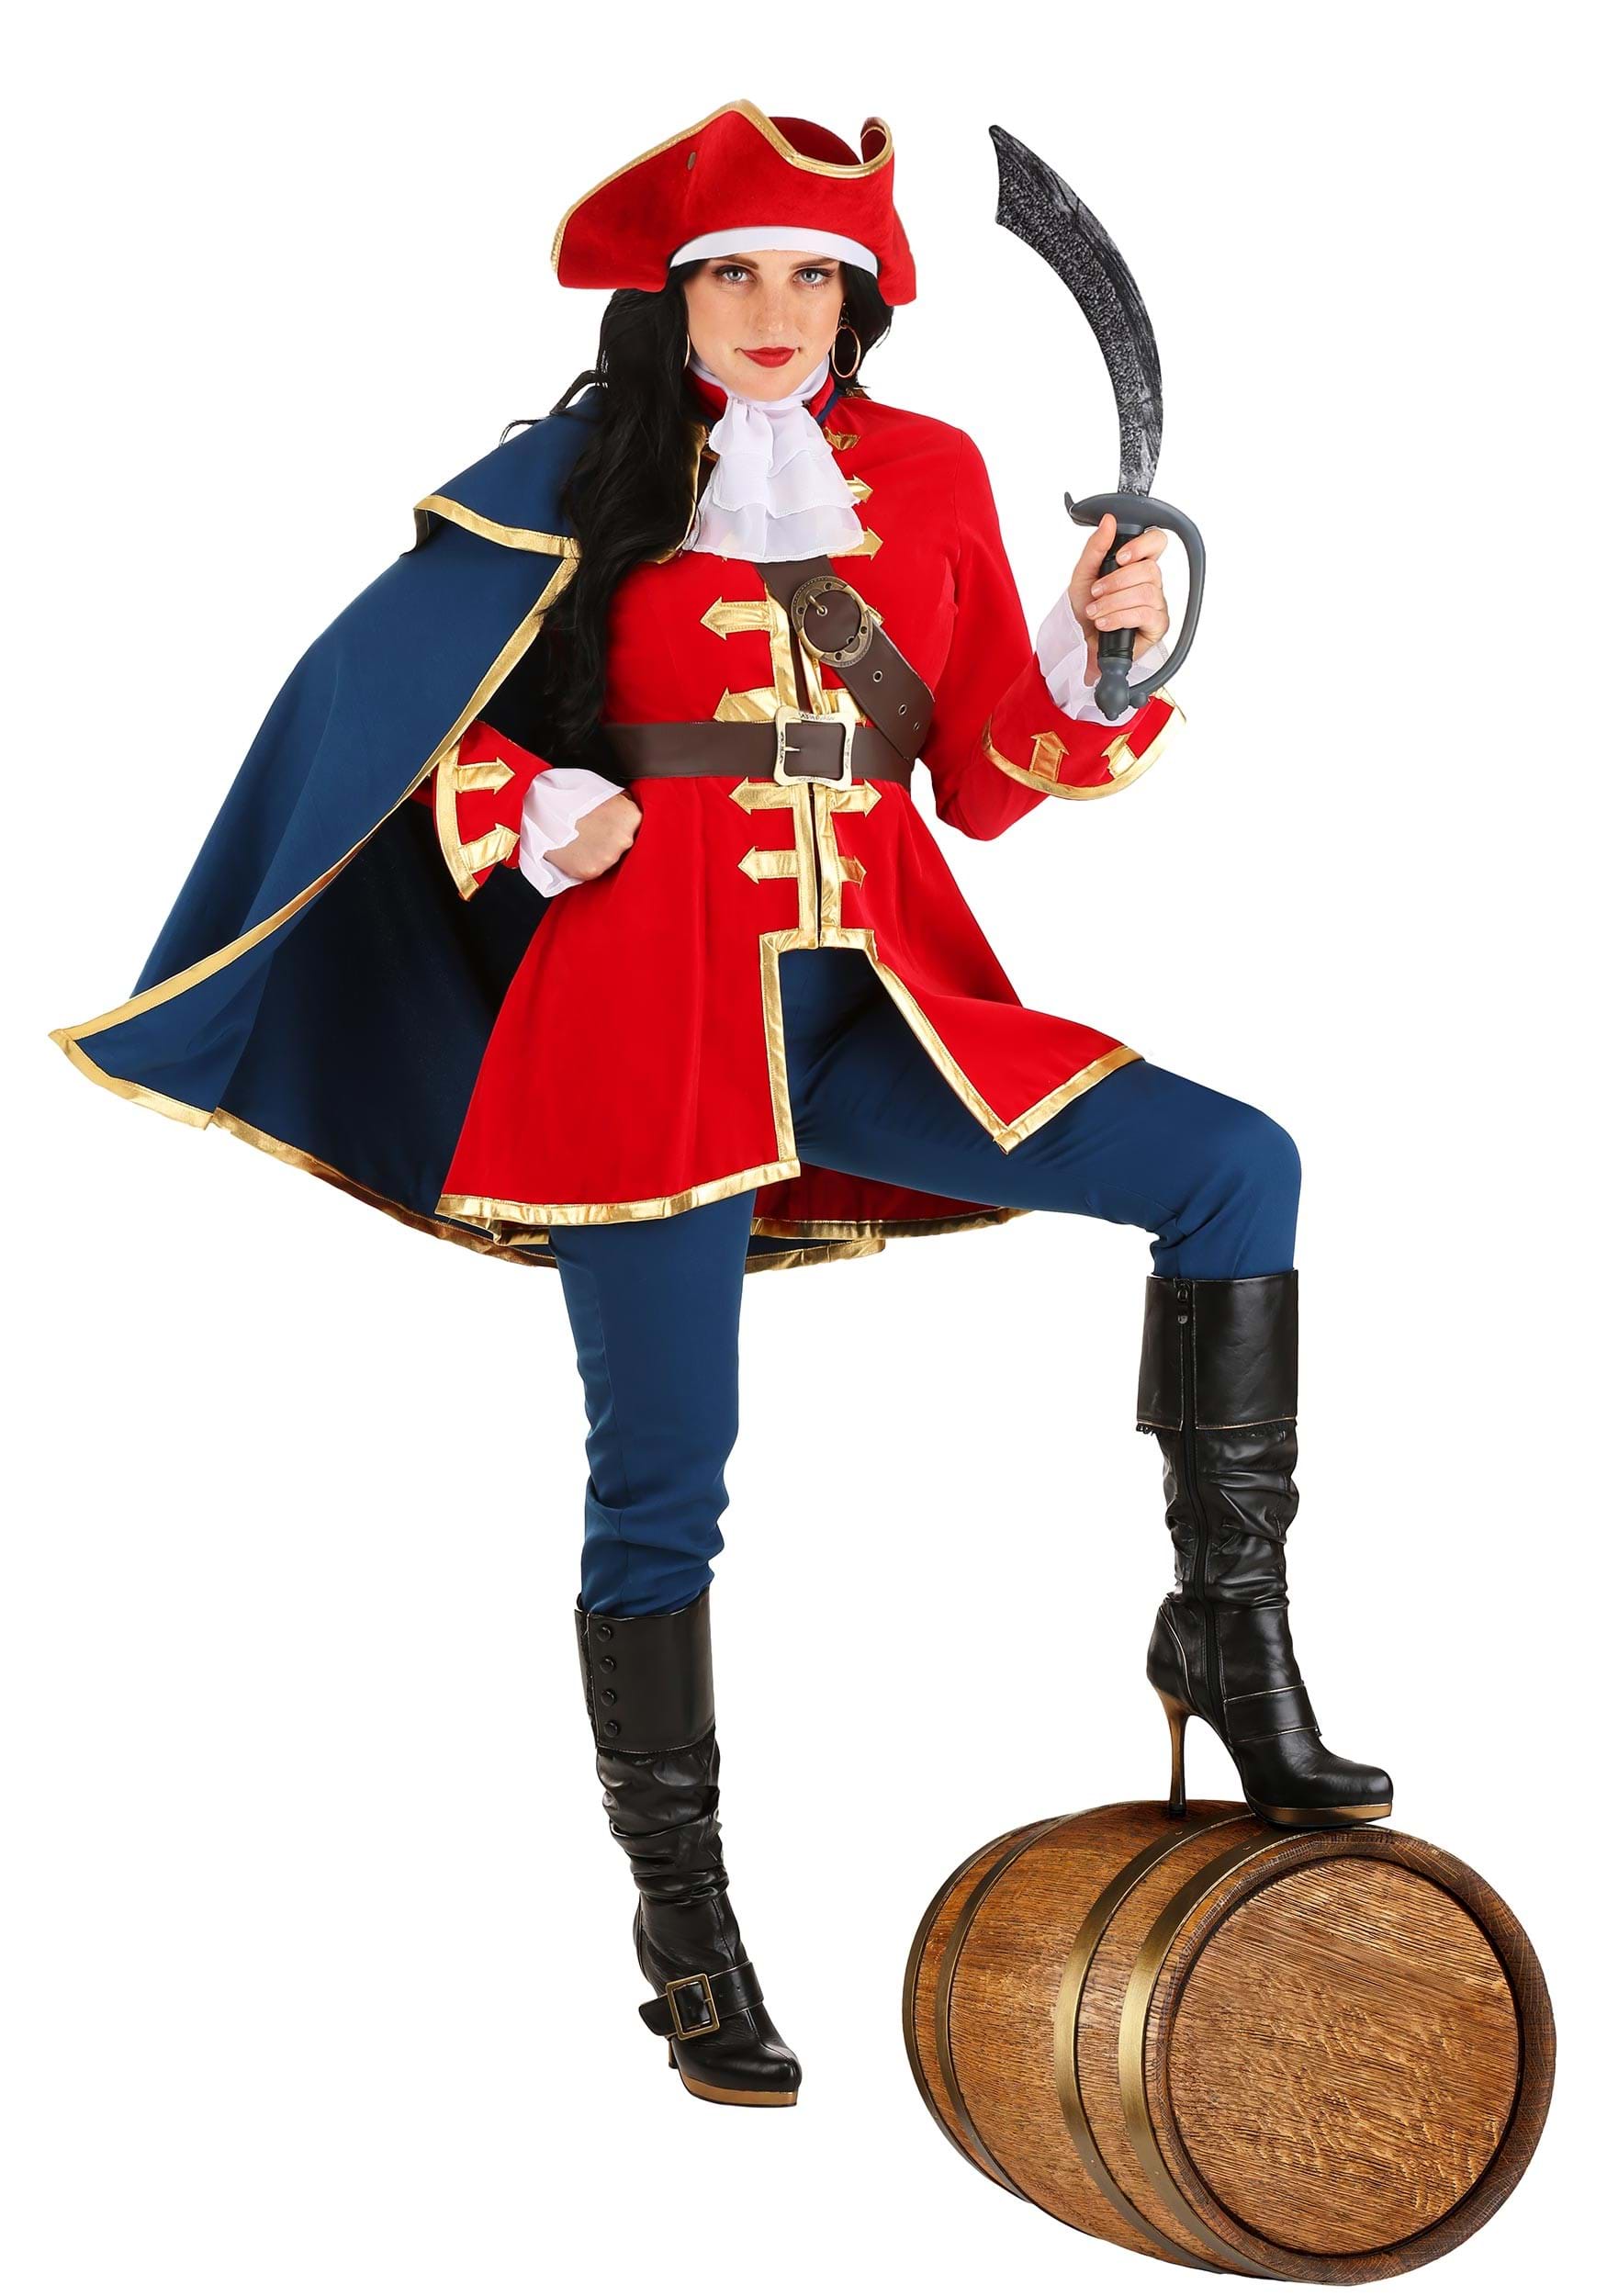 https://images.halloweencostumes.com/products/62878/1-1/captain-pirate-womens-costume.jpg